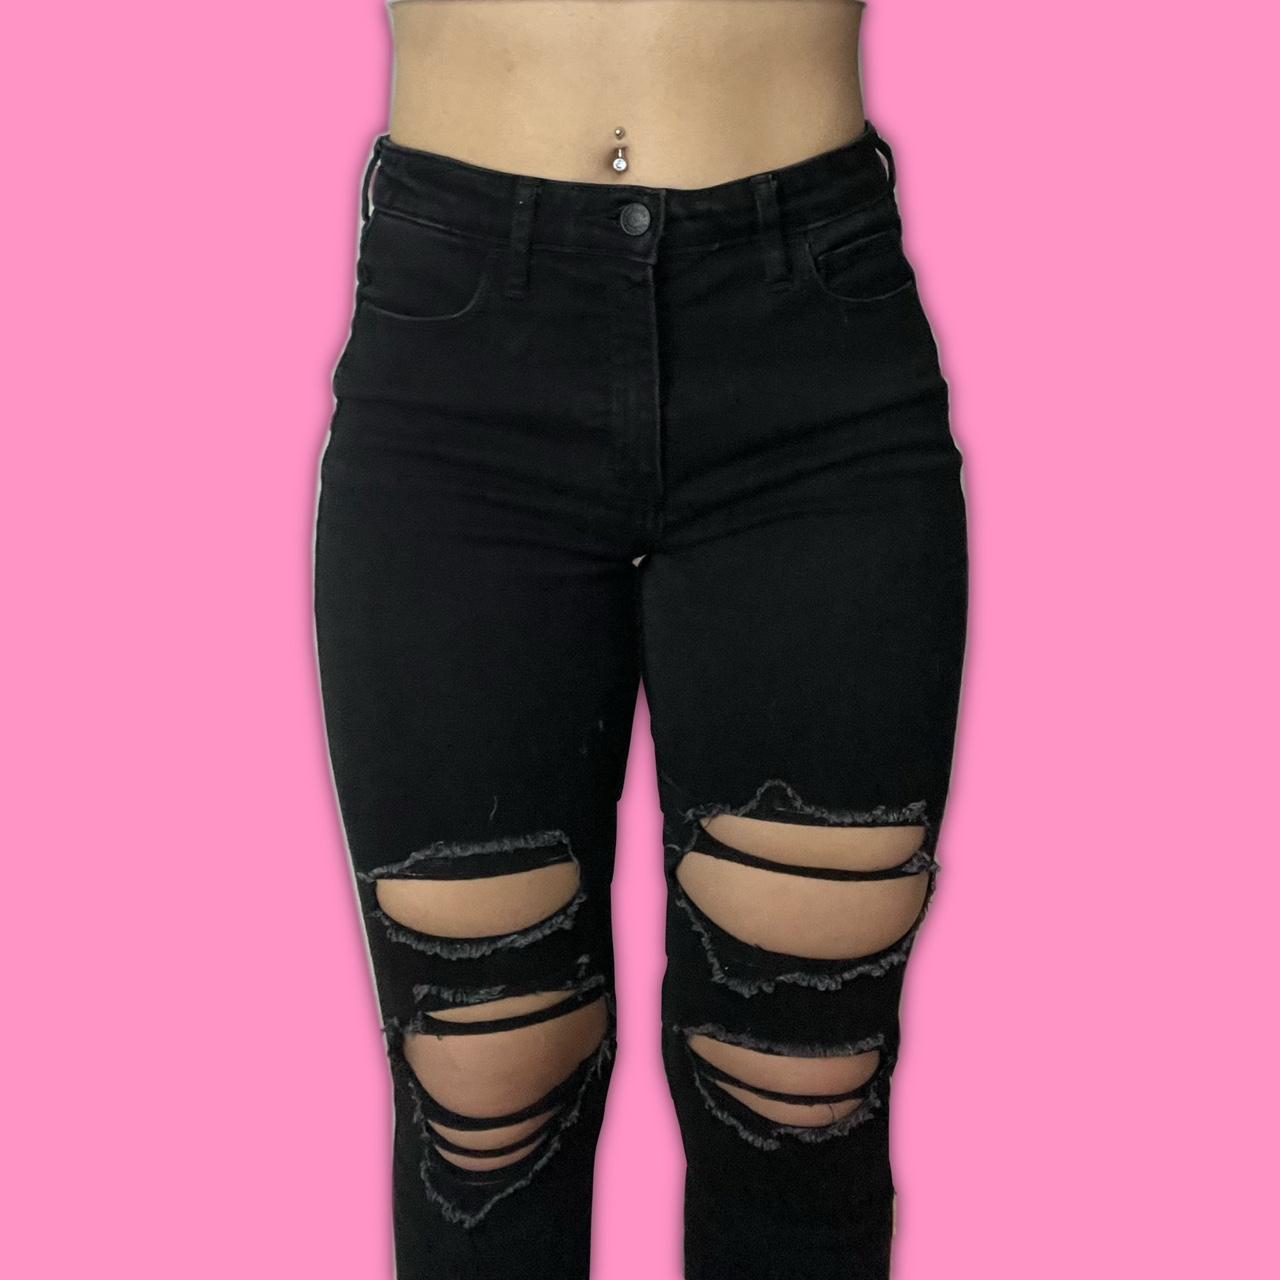 Hollister High-Rise Super Skinny Jeans, Black Ripped